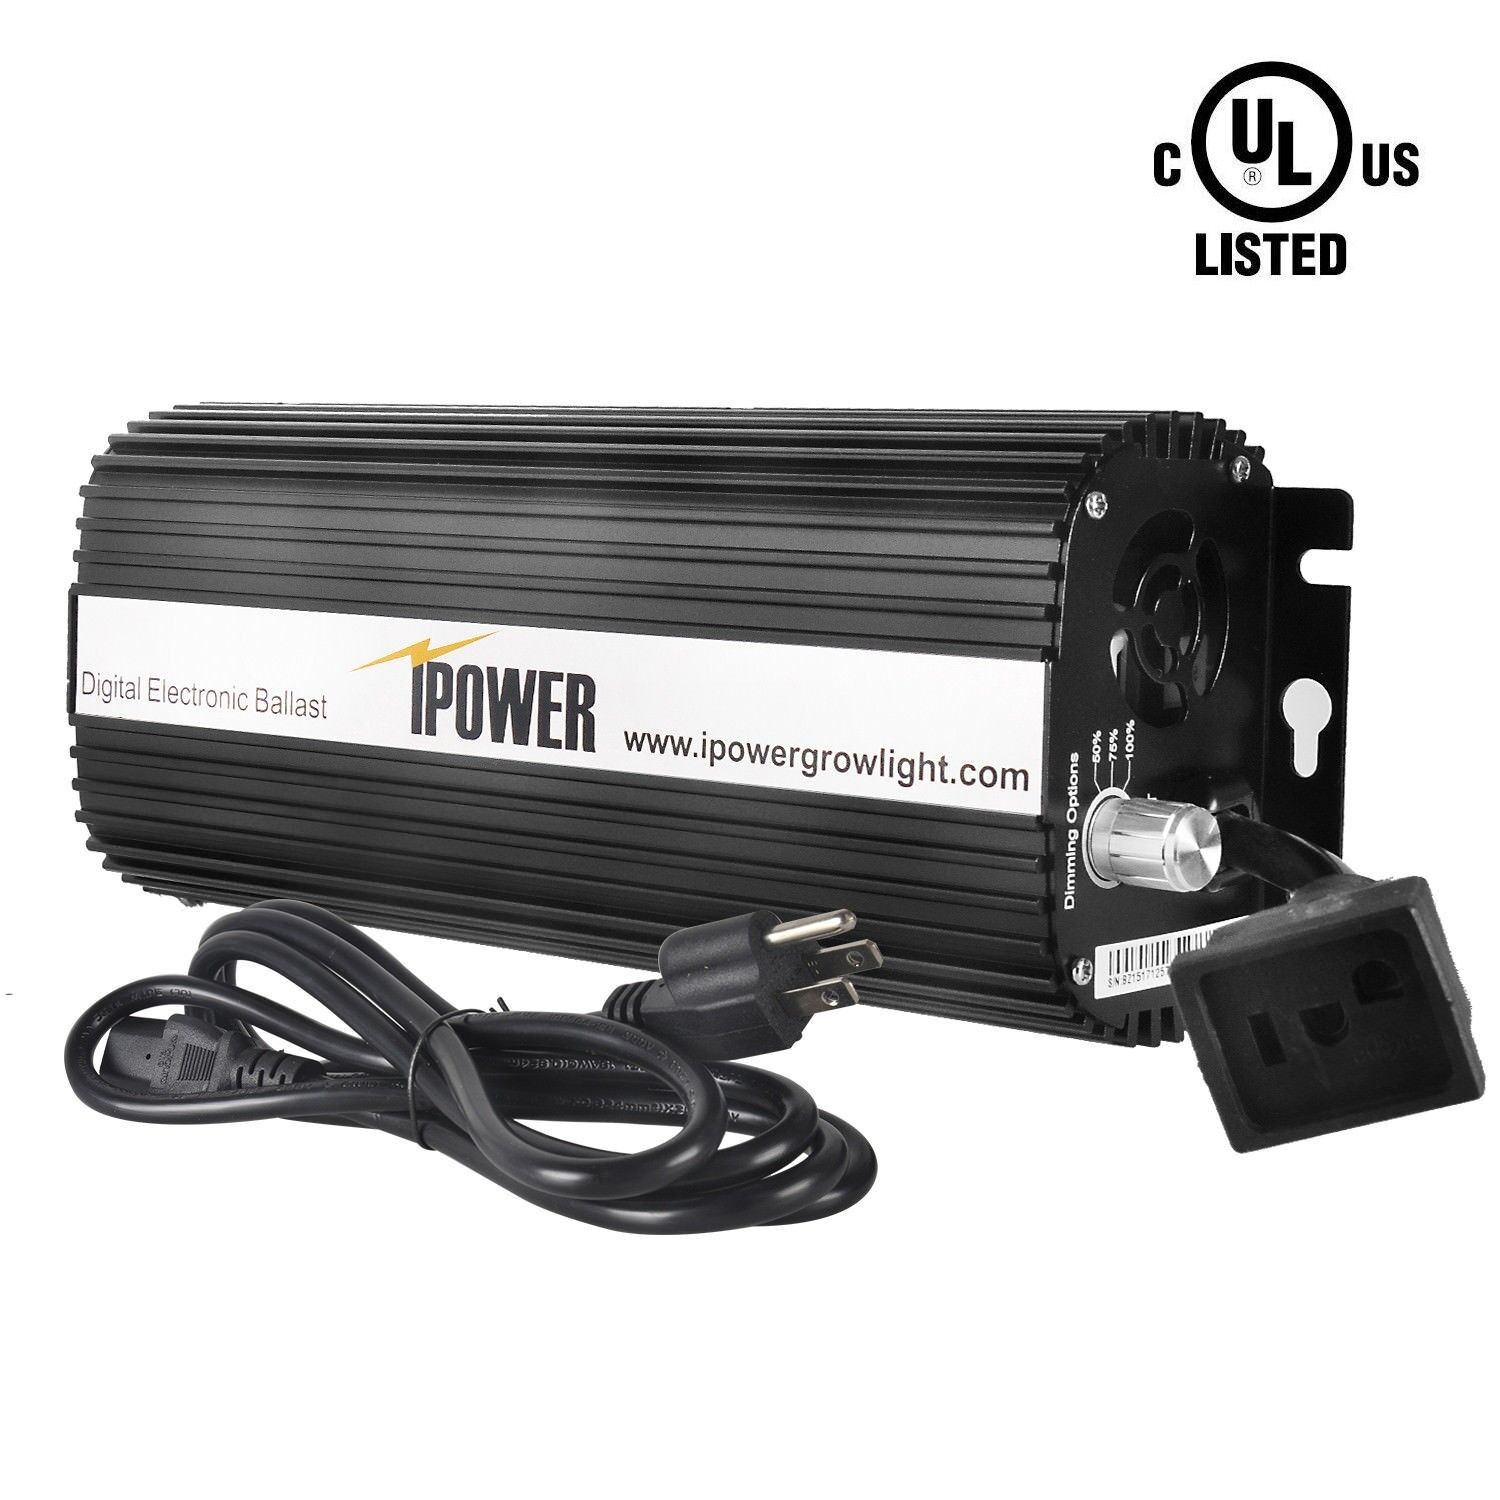 iPower 400W 600W 1000W Digital Dimmable Electronic Ballast for HPS MH Grow Light